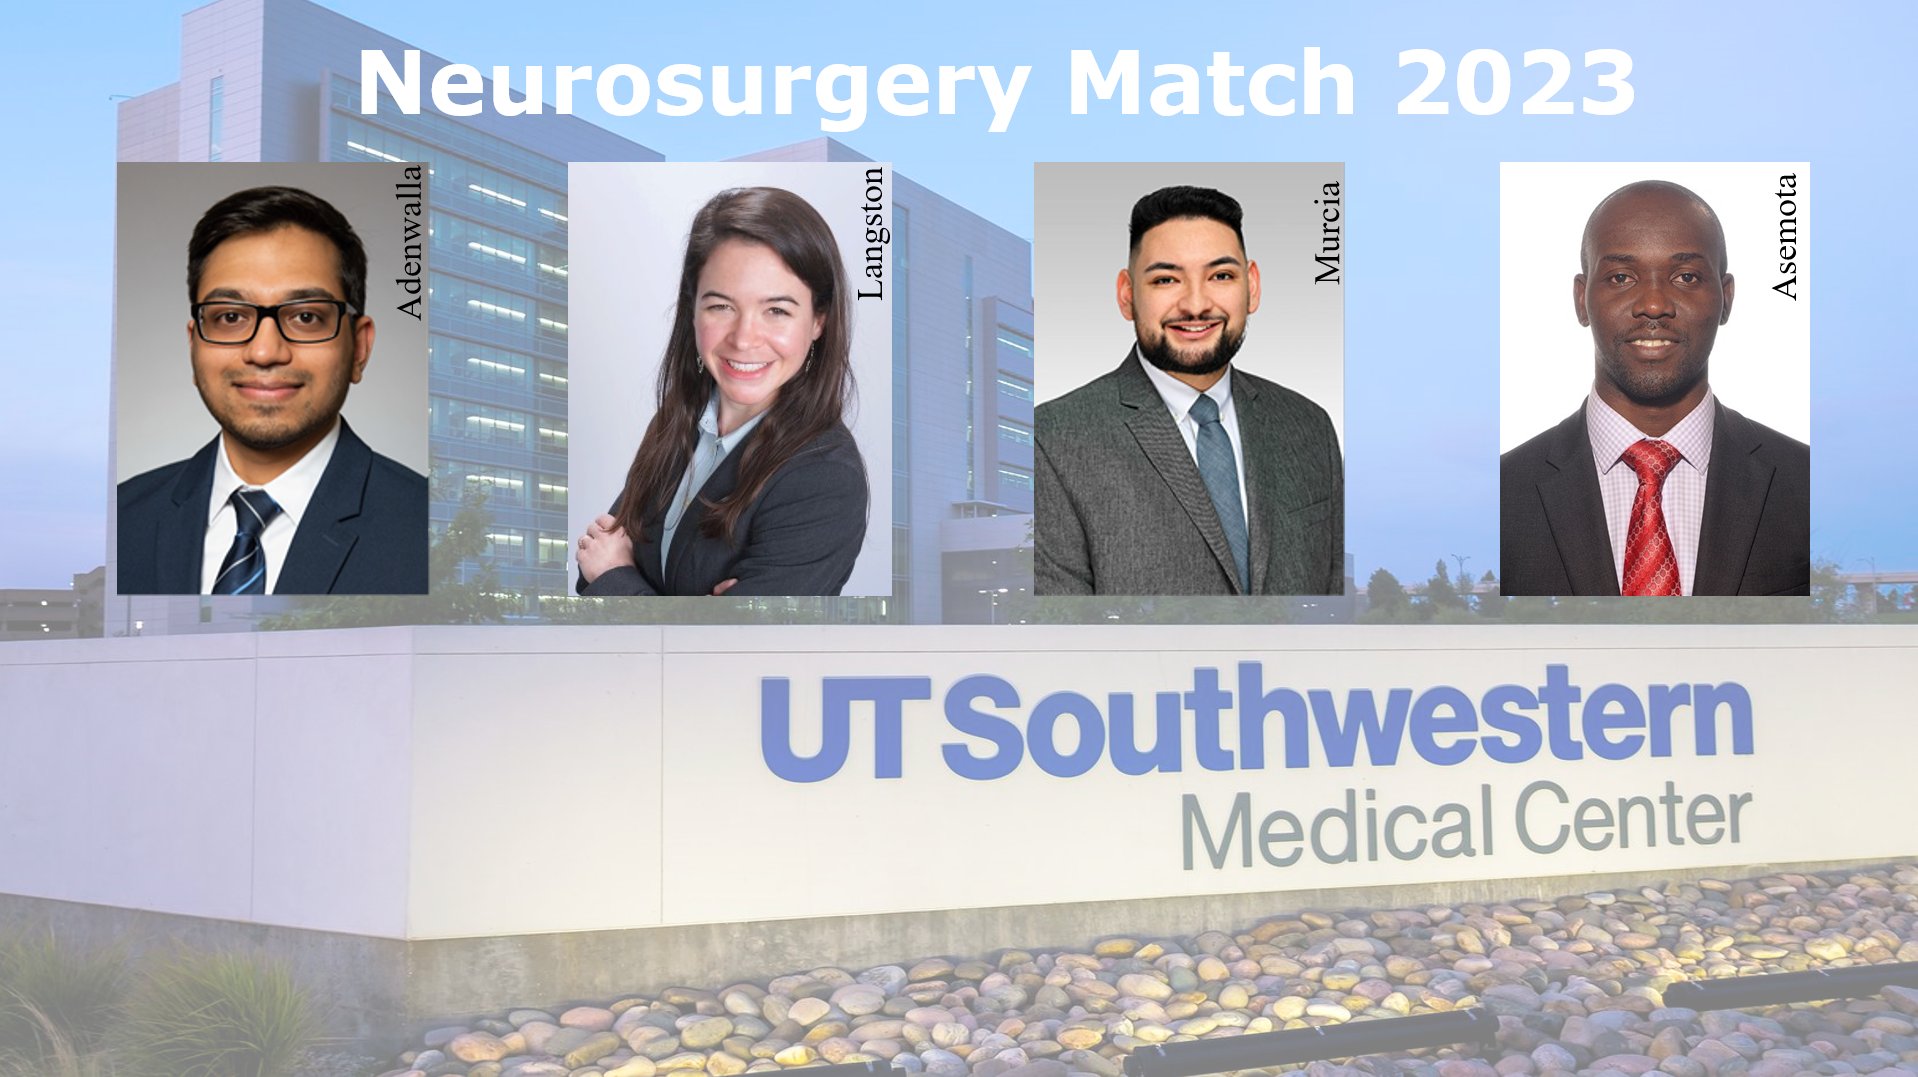 UTSW Neurosurgery on Twitter "Happy Match day!! We are so excited to